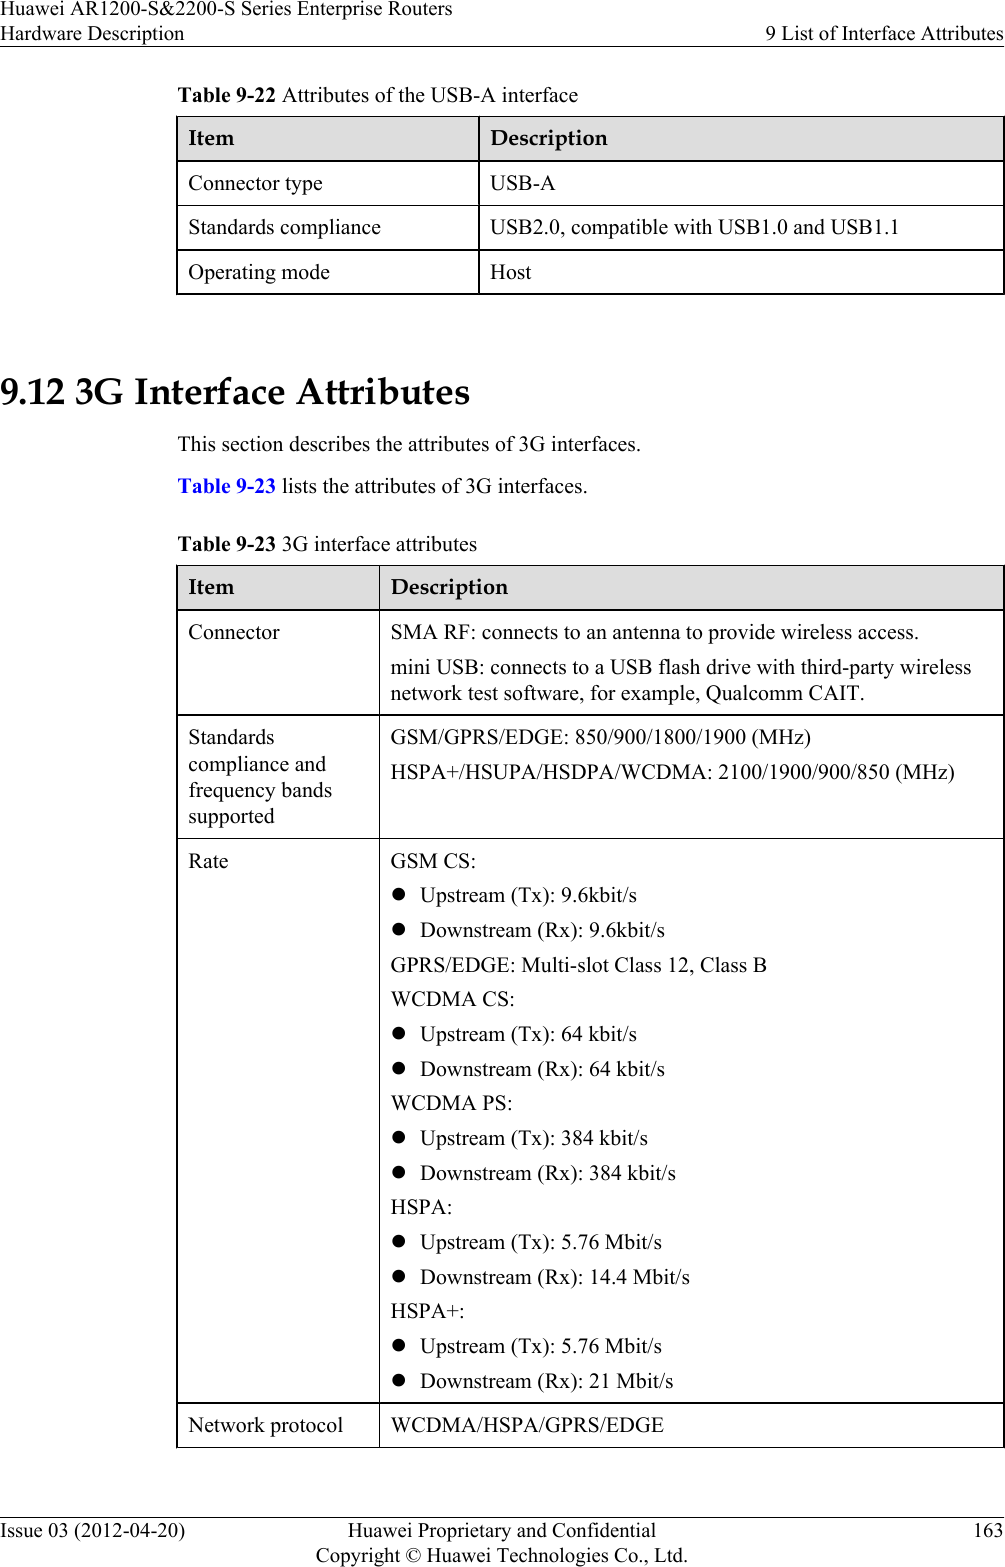 Table 9-22 Attributes of the USB-A interfaceItem DescriptionConnector type USB-AStandards compliance USB2.0, compatible with USB1.0 and USB1.1Operating mode Host 9.12 3G Interface AttributesThis section describes the attributes of 3G interfaces.Table 9-23 lists the attributes of 3G interfaces.Table 9-23 3G interface attributesItem DescriptionConnector SMA RF: connects to an antenna to provide wireless access.mini USB: connects to a USB flash drive with third-party wirelessnetwork test software, for example, Qualcomm CAIT.Standardscompliance andfrequency bandssupportedGSM/GPRS/EDGE: 850/900/1800/1900 (MHz)HSPA+/HSUPA/HSDPA/WCDMA: 2100/1900/900/850 (MHz)Rate GSM CS:lUpstream (Tx): 9.6kbit/slDownstream (Rx): 9.6kbit/sGPRS/EDGE: Multi-slot Class 12, Class BWCDMA CS:lUpstream (Tx): 64 kbit/slDownstream (Rx): 64 kbit/sWCDMA PS:lUpstream (Tx): 384 kbit/slDownstream (Rx): 384 kbit/sHSPA:lUpstream (Tx): 5.76 Mbit/slDownstream (Rx): 14.4 Mbit/sHSPA+:lUpstream (Tx): 5.76 Mbit/slDownstream (Rx): 21 Mbit/sNetwork protocol WCDMA/HSPA/GPRS/EDGE Huawei AR1200-S&amp;2200-S Series Enterprise RoutersHardware Description 9 List of Interface AttributesIssue 03 (2012-04-20) Huawei Proprietary and ConfidentialCopyright © Huawei Technologies Co., Ltd.163